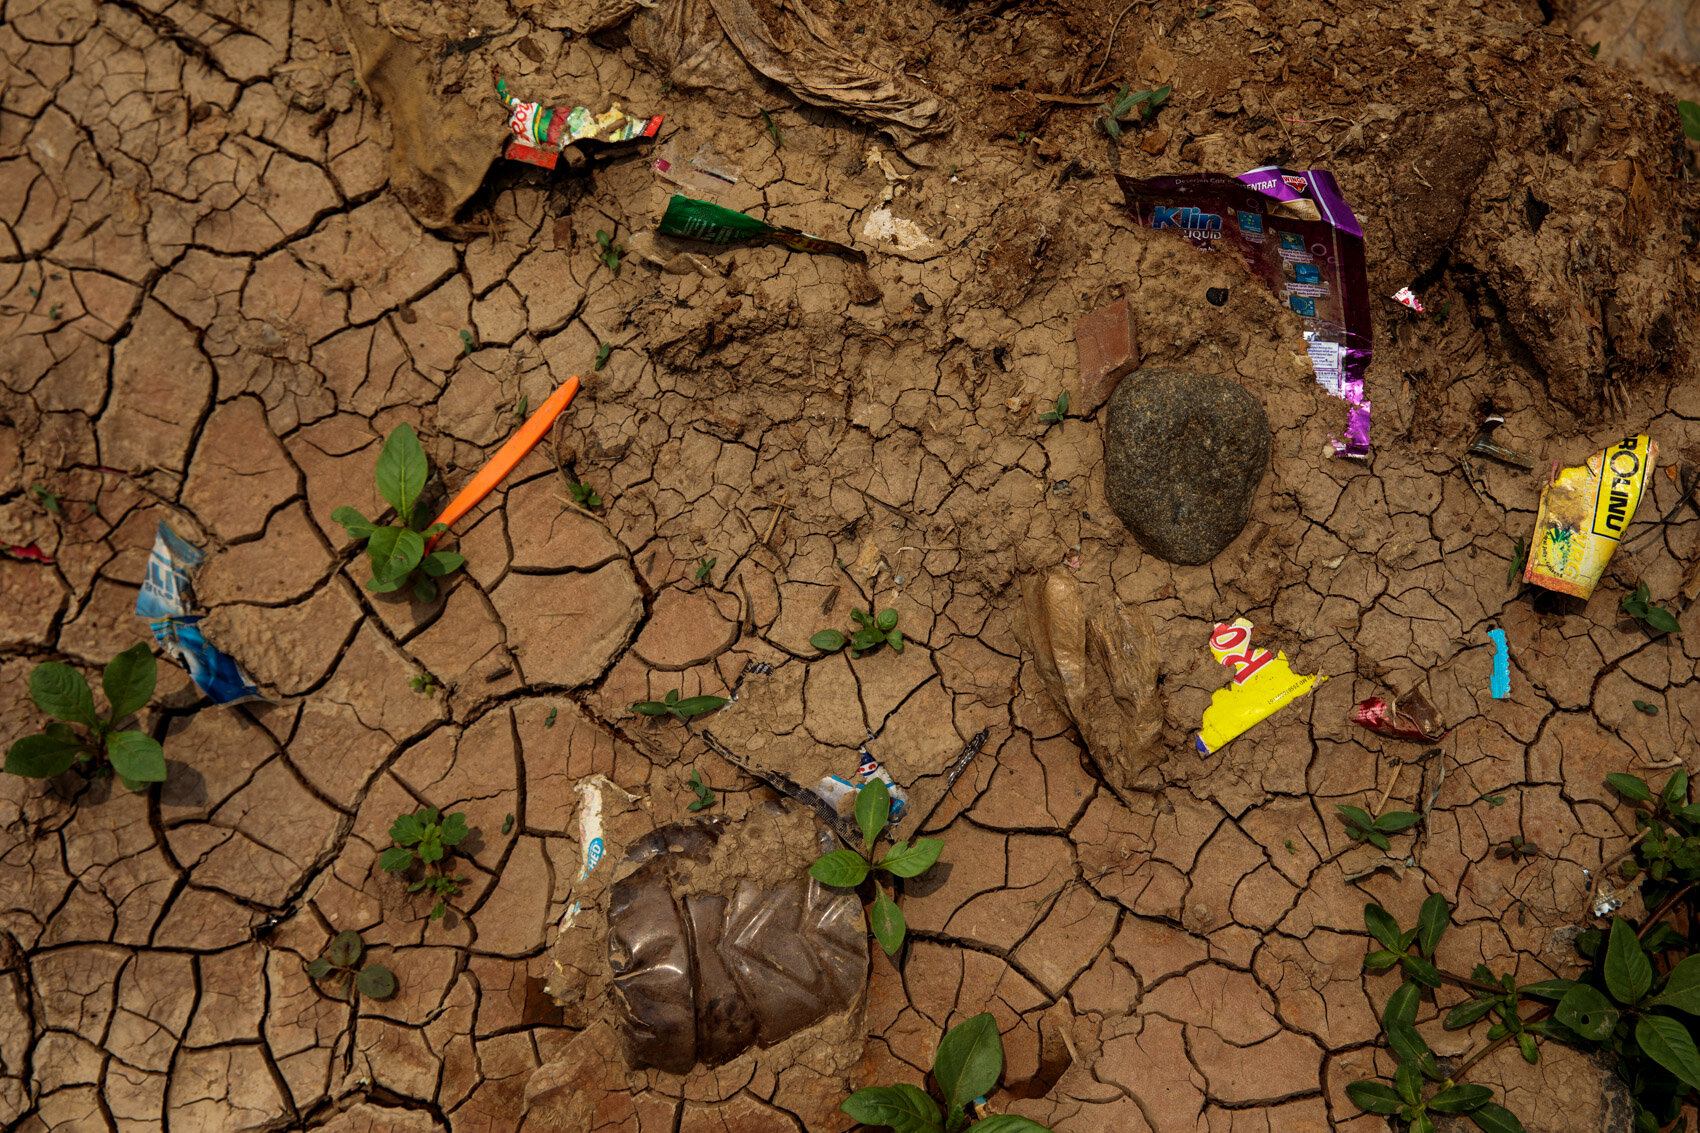  BANDUNG, INDONESIA: Plastic waste is embedded into the dry mud on the banks of the Citarum River on November 20th, 2019 in Bandung, Java, Indonesia.  